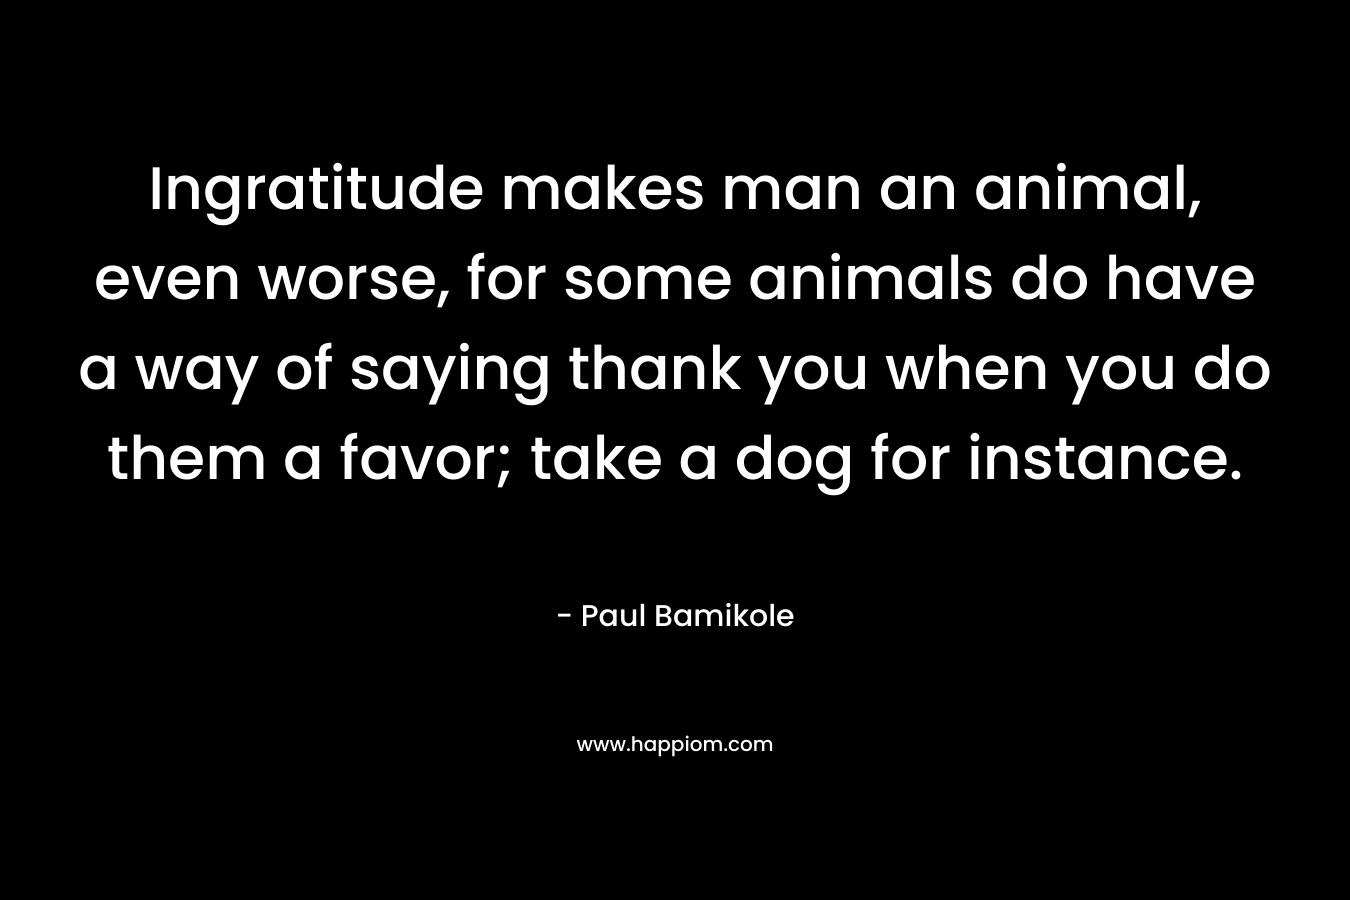 Ingratitude makes man an animal, even worse, for some animals do have a way of saying thank you when you do them a favor; take a dog for instance. – Paul Bamikole